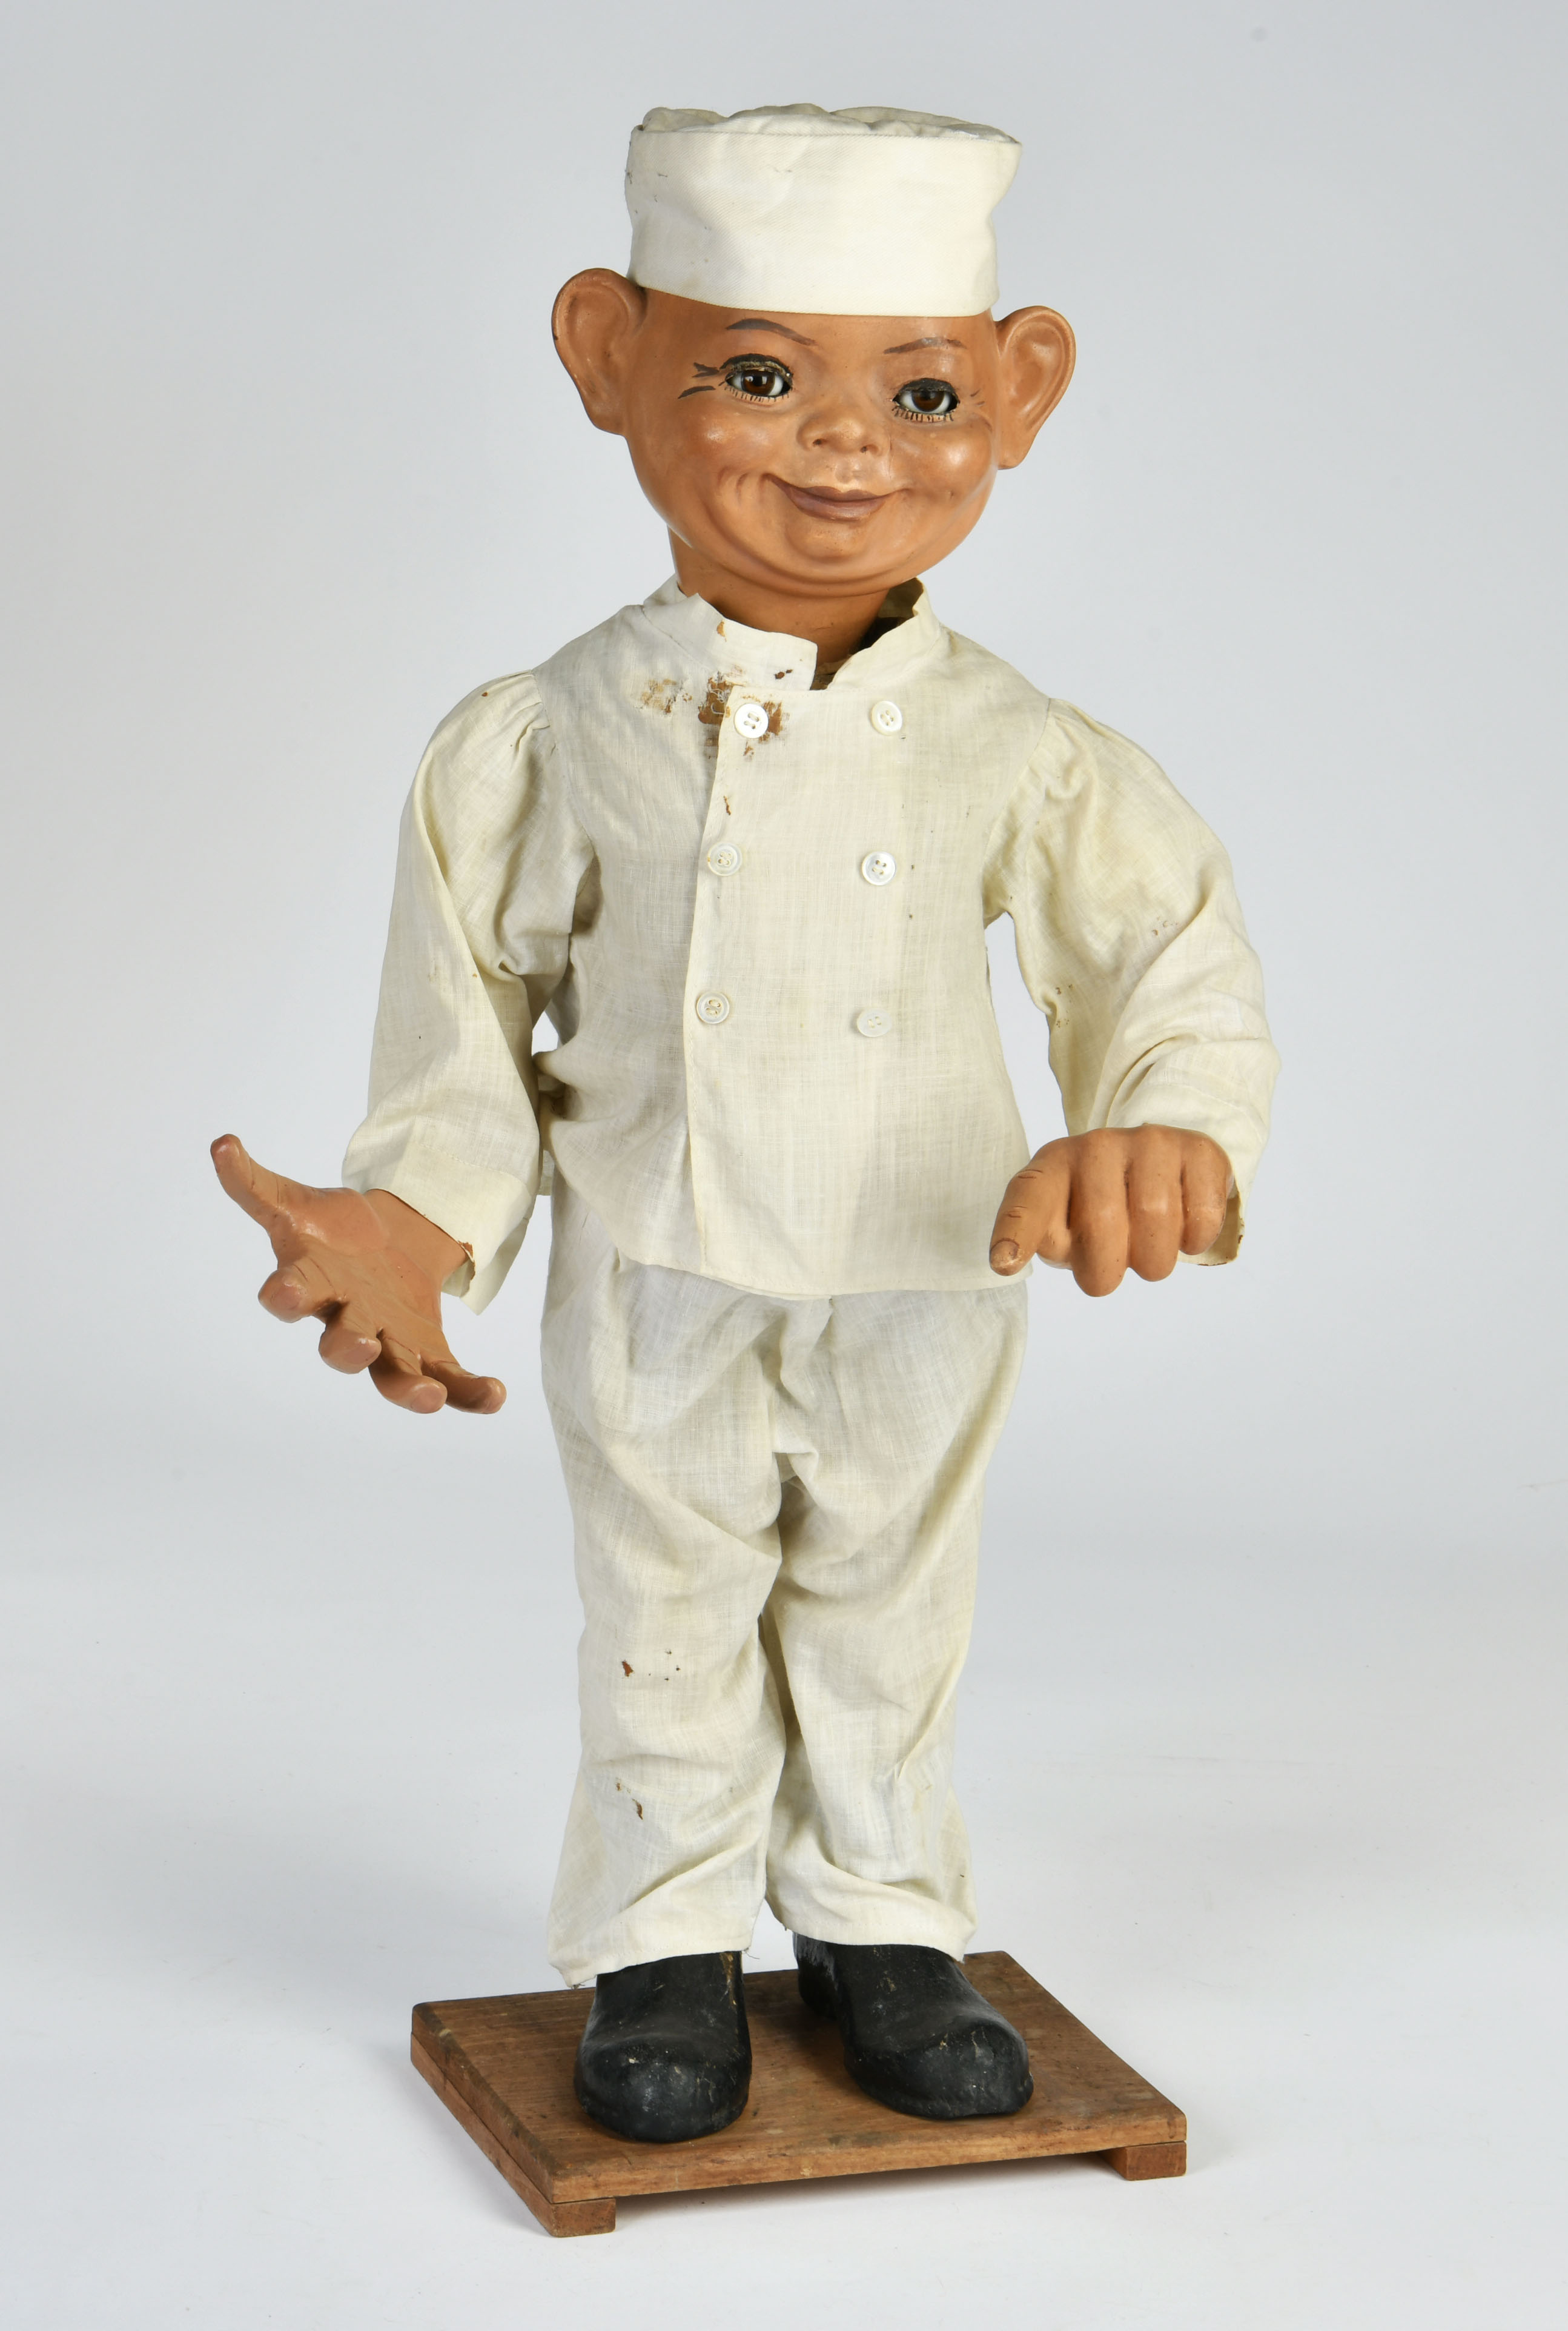 Advertising automaton "cook", bobblehead with limber eyes, height 66 cm, cw is stuck, clothing a